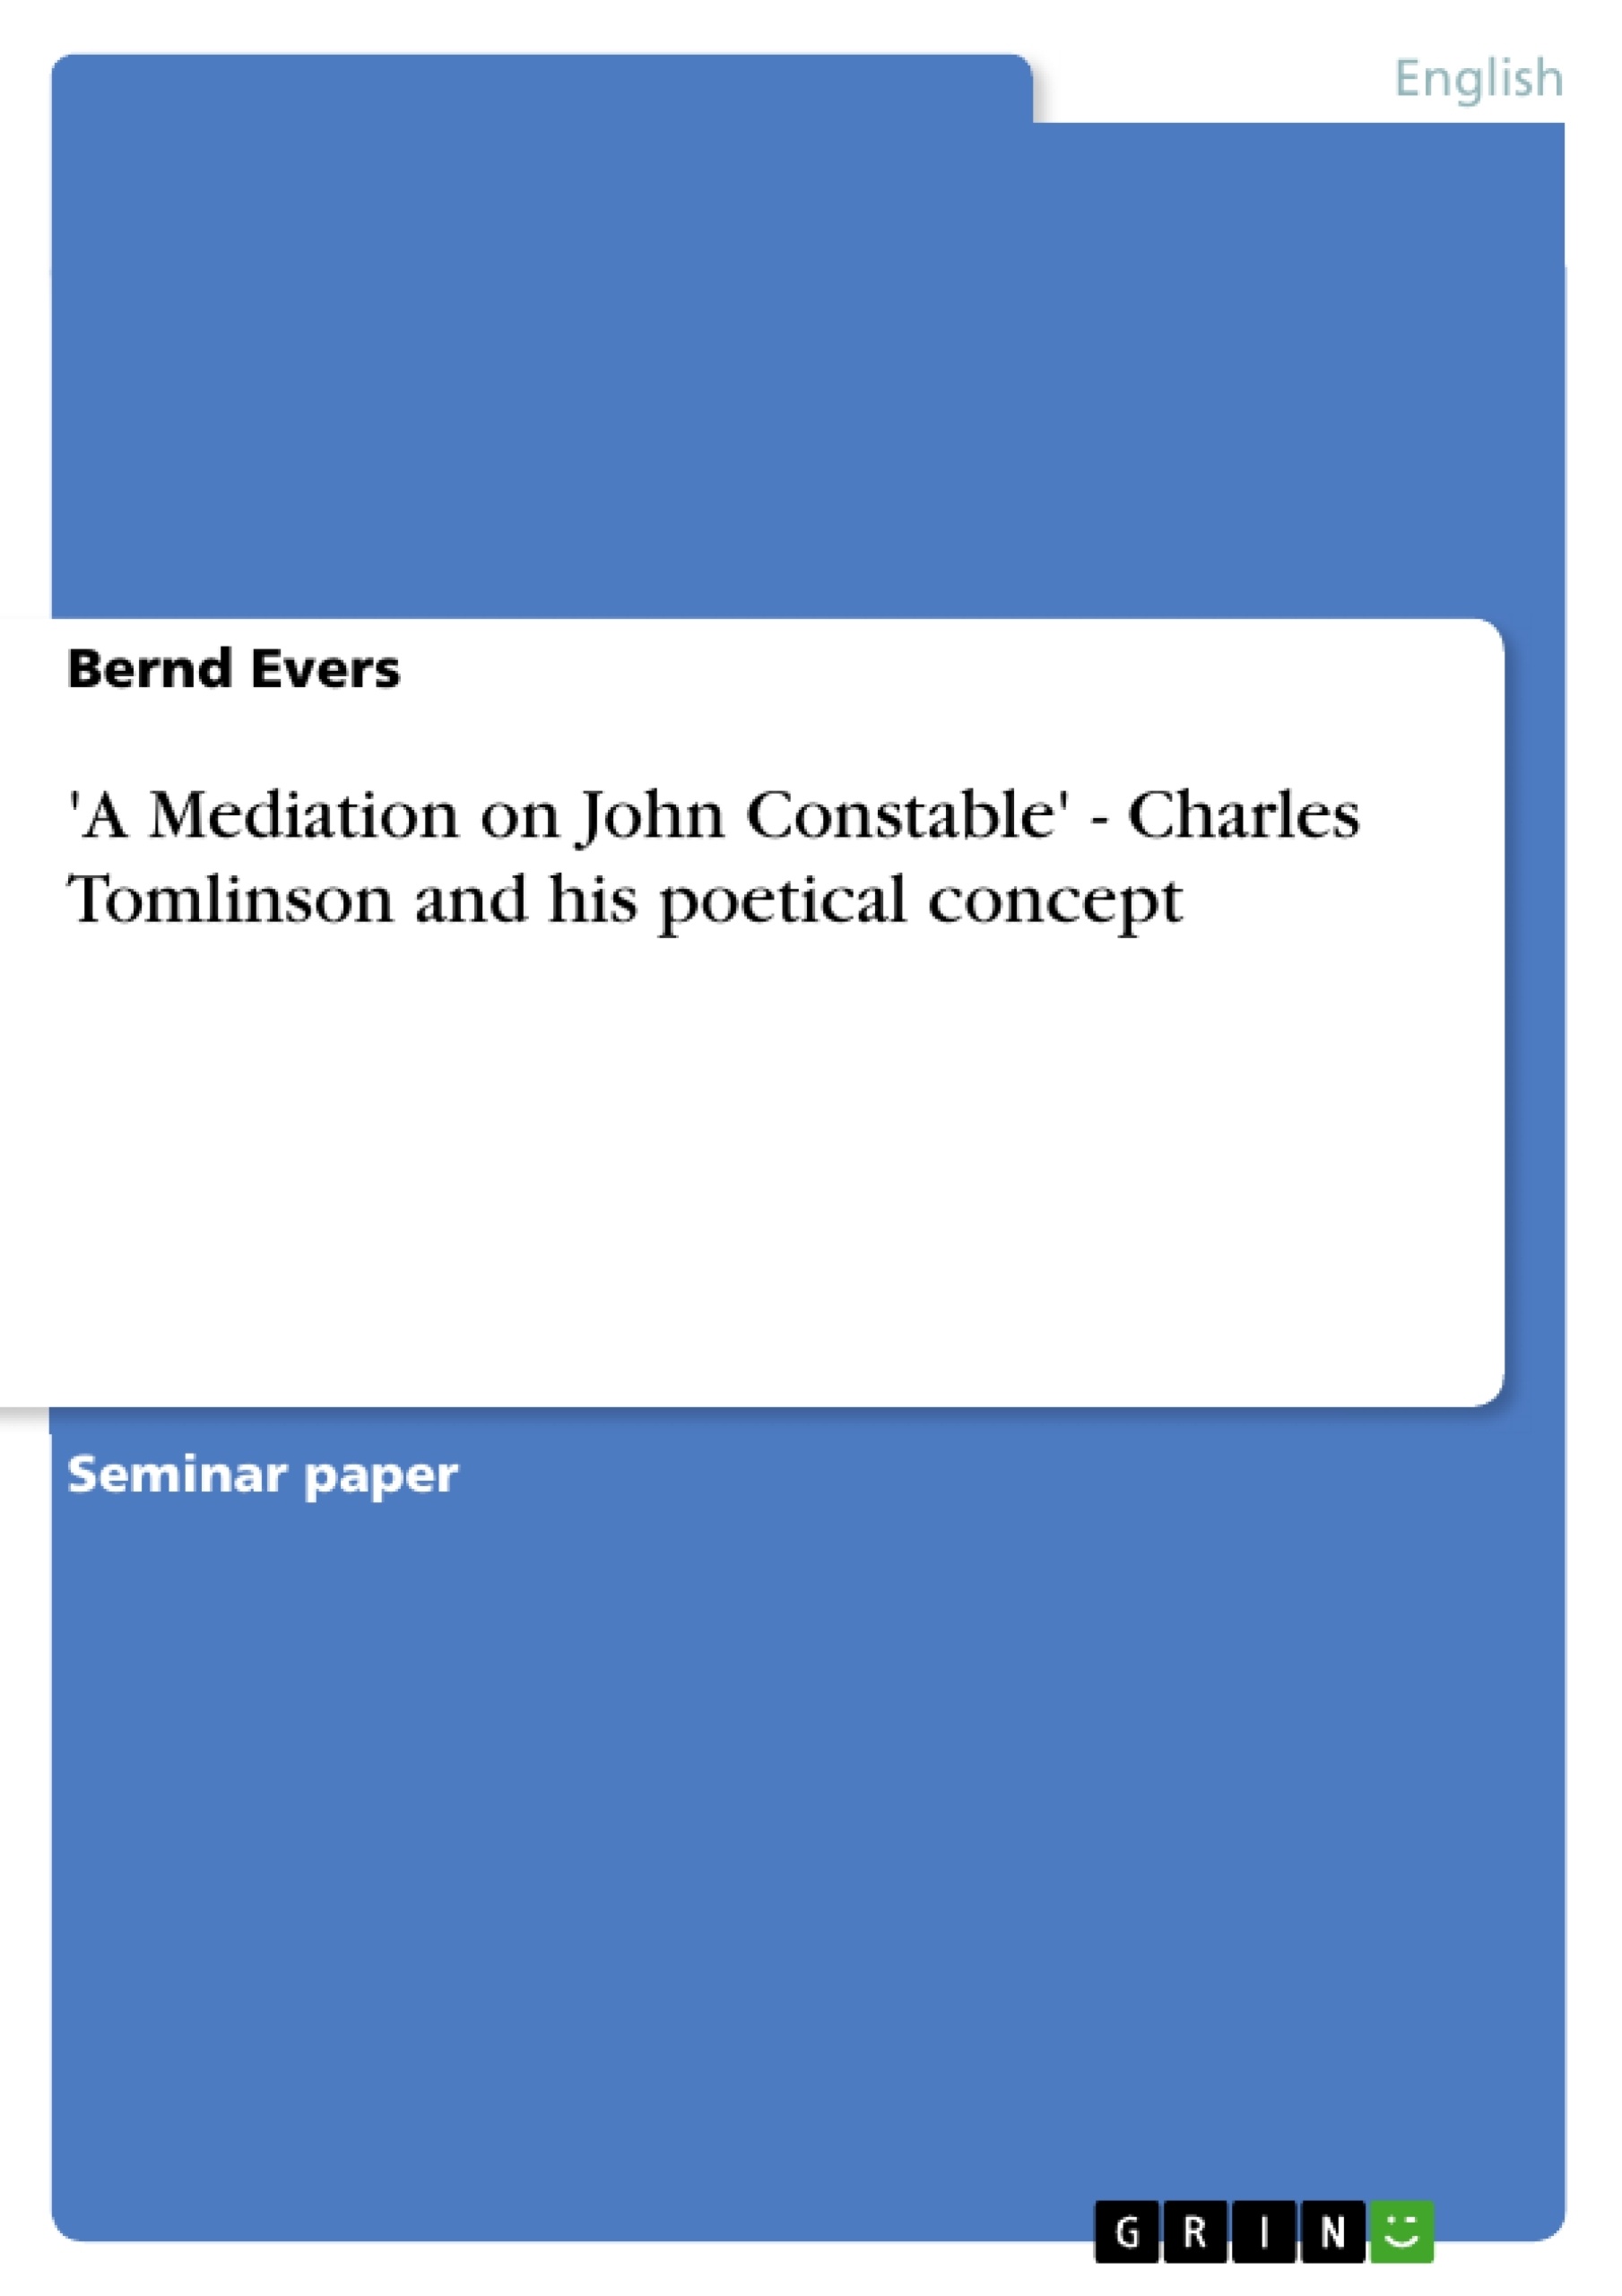 Título: 'A Mediation on John Constable' - Charles Tomlinson and his poetical concept